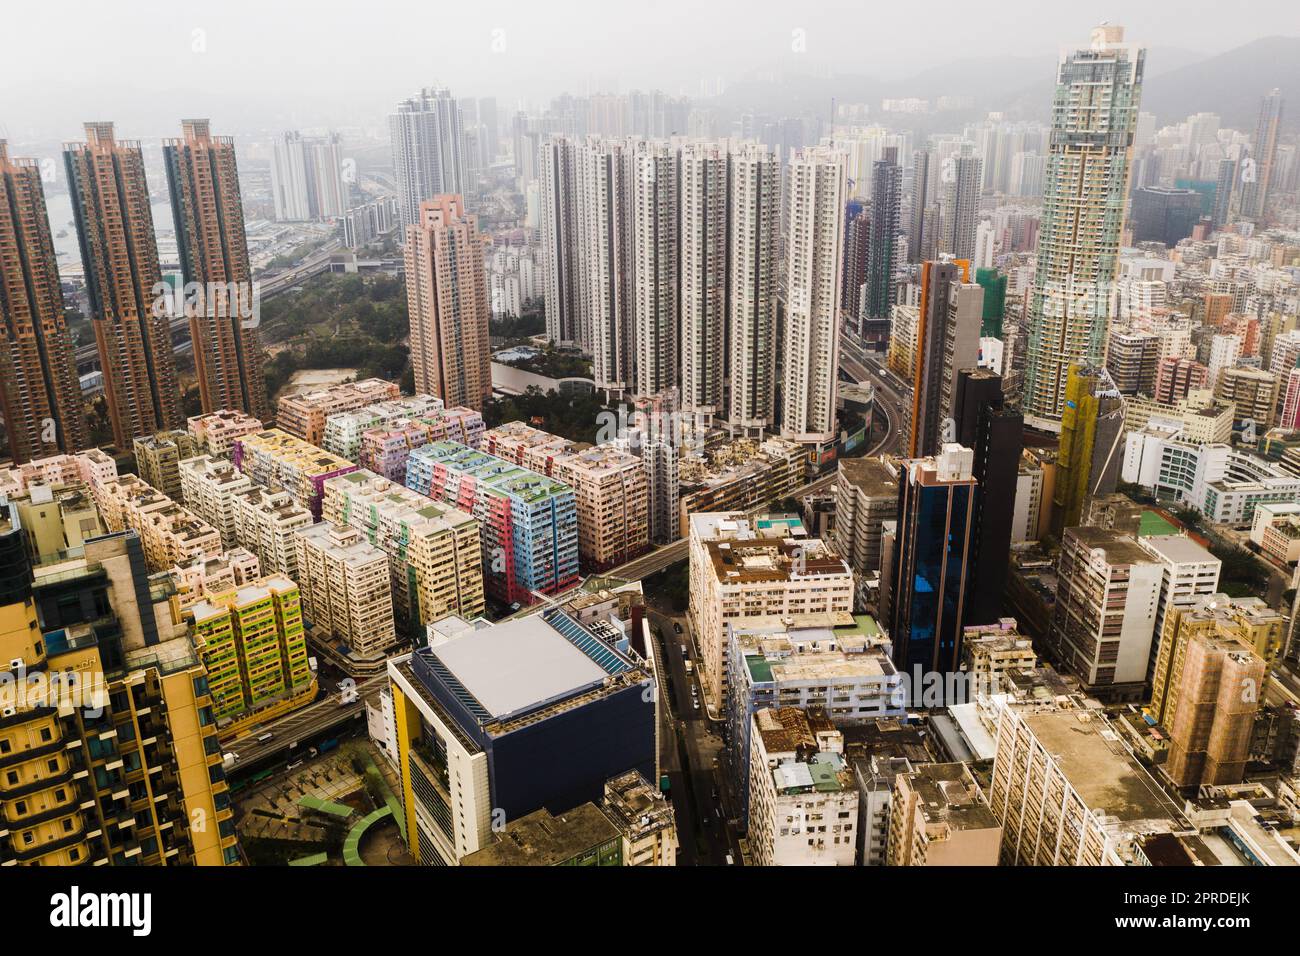 Come and explore the city of Hong Kong. skyscrapers, office blocks and other commercial buildings in the urban metropolis of Hong Kong. Stock Photo